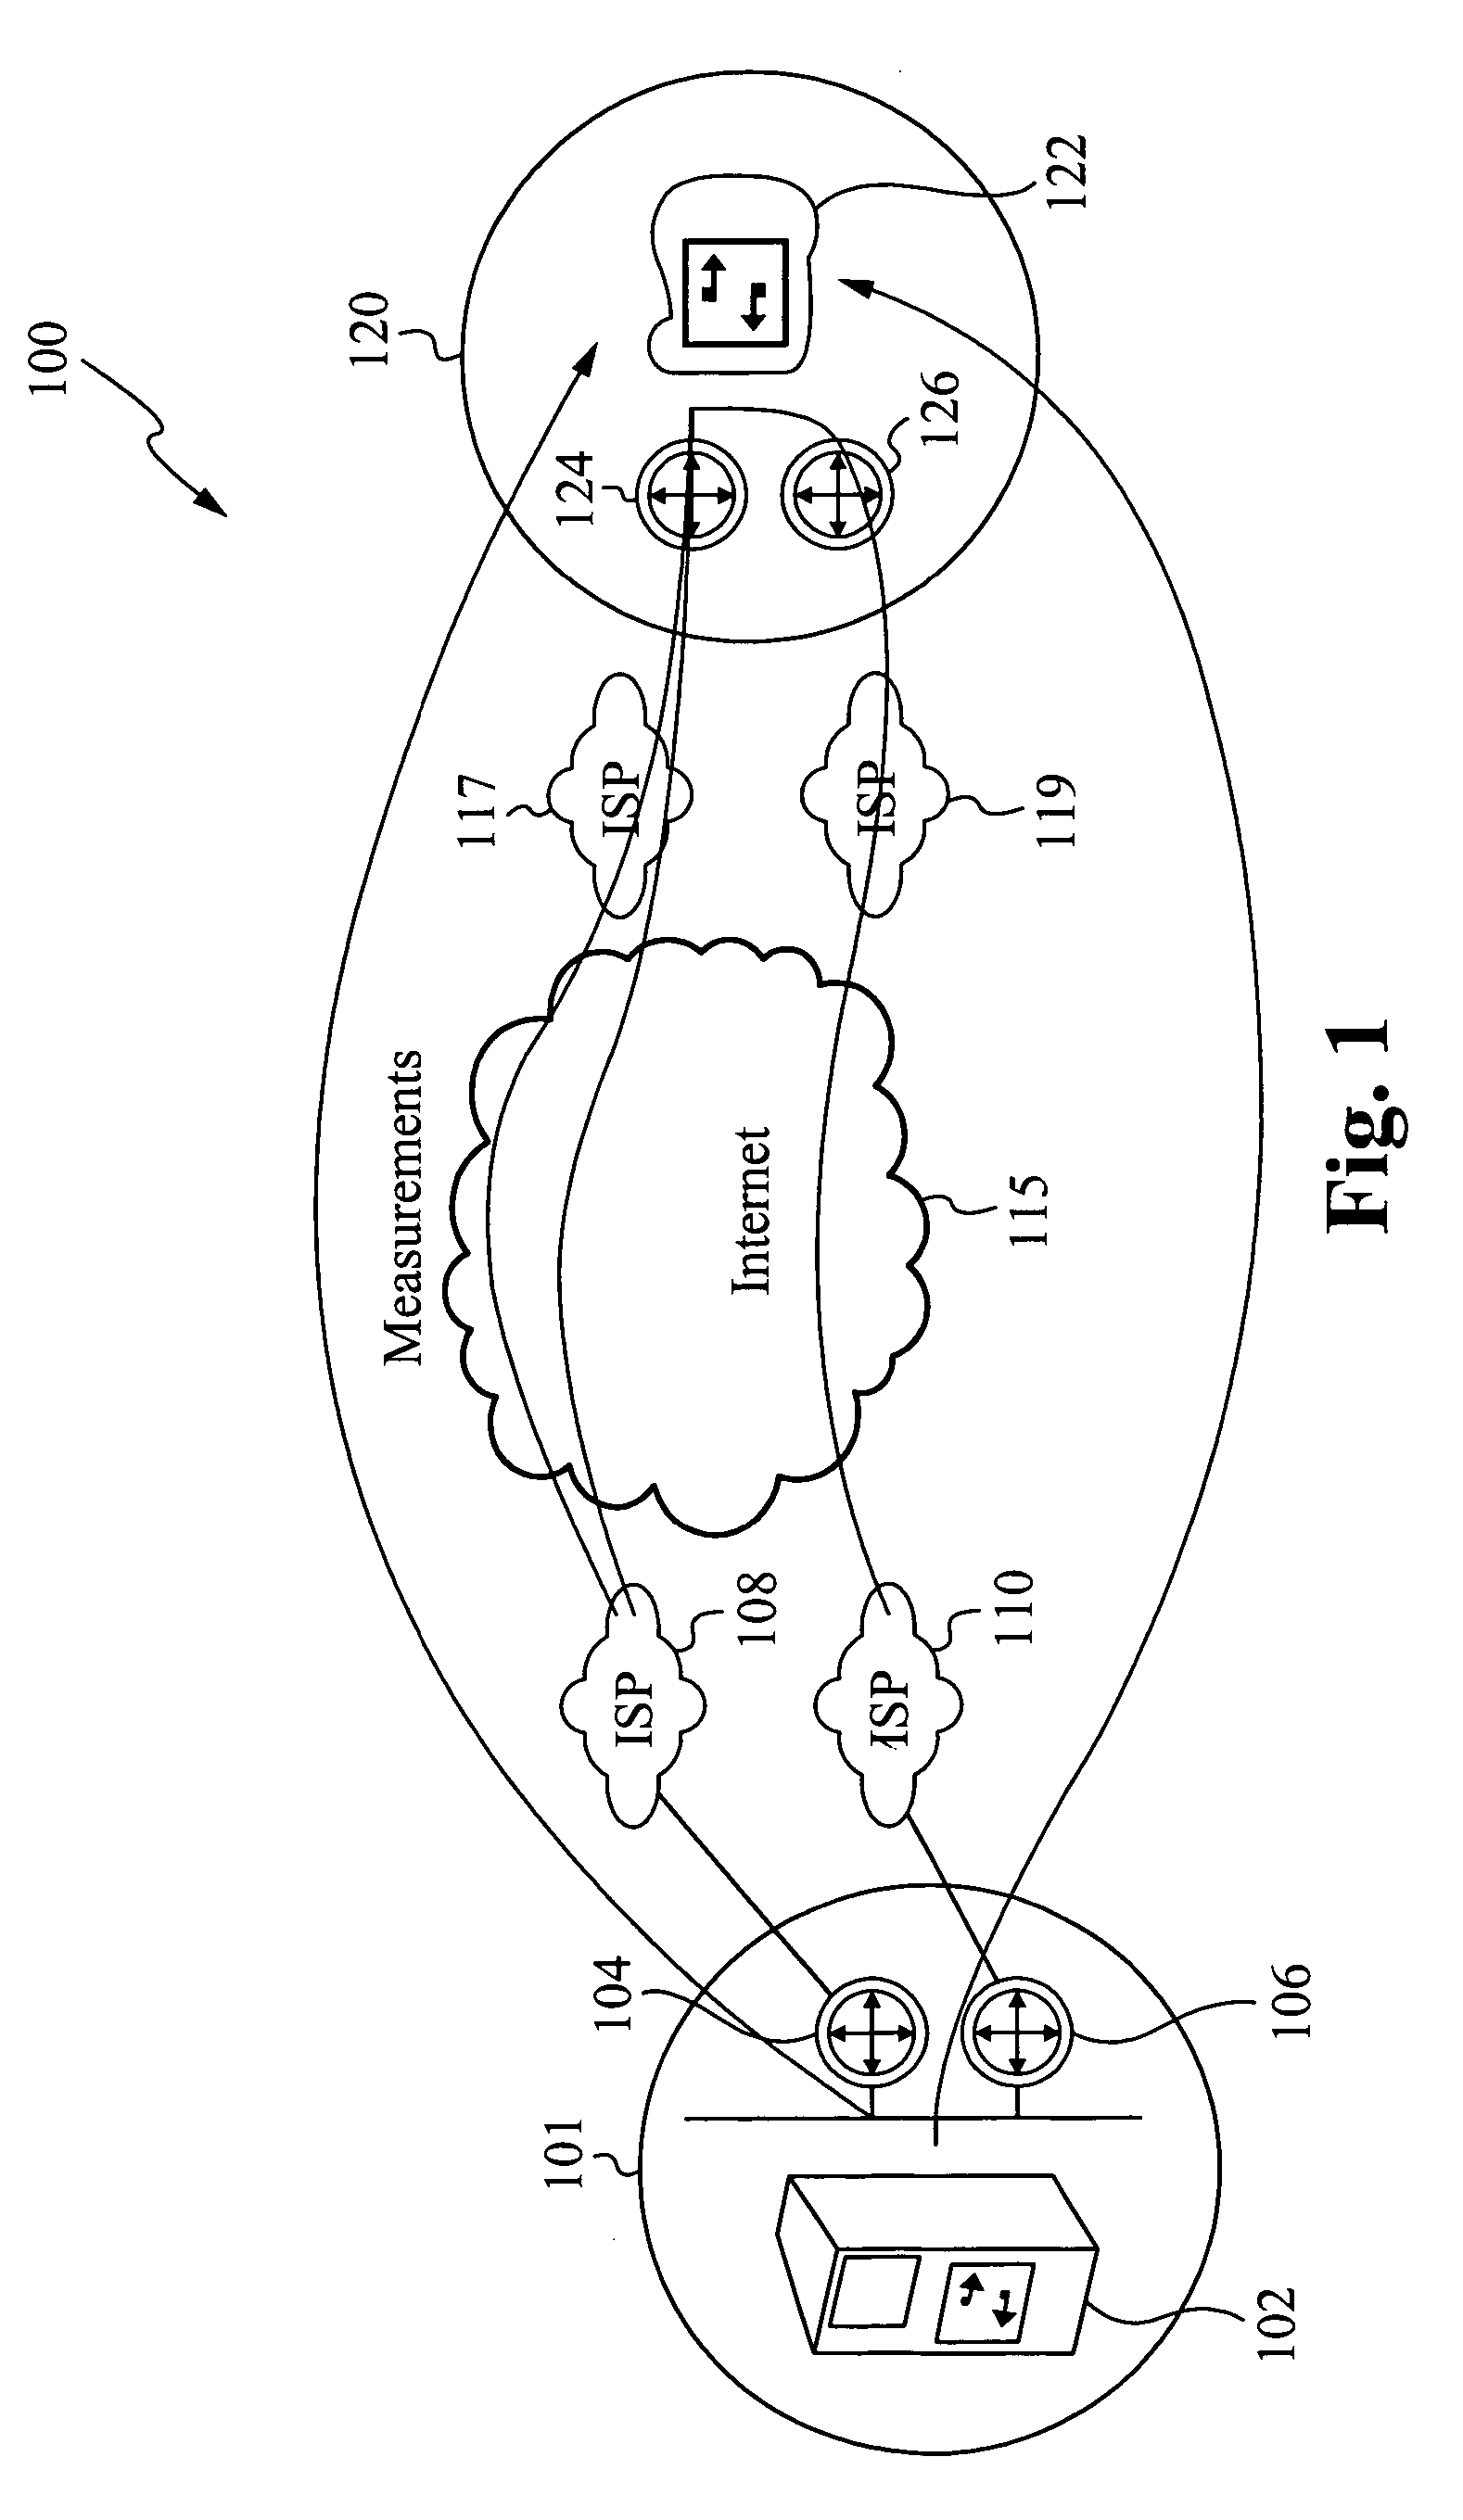 Methods of and systems for remote outbound control